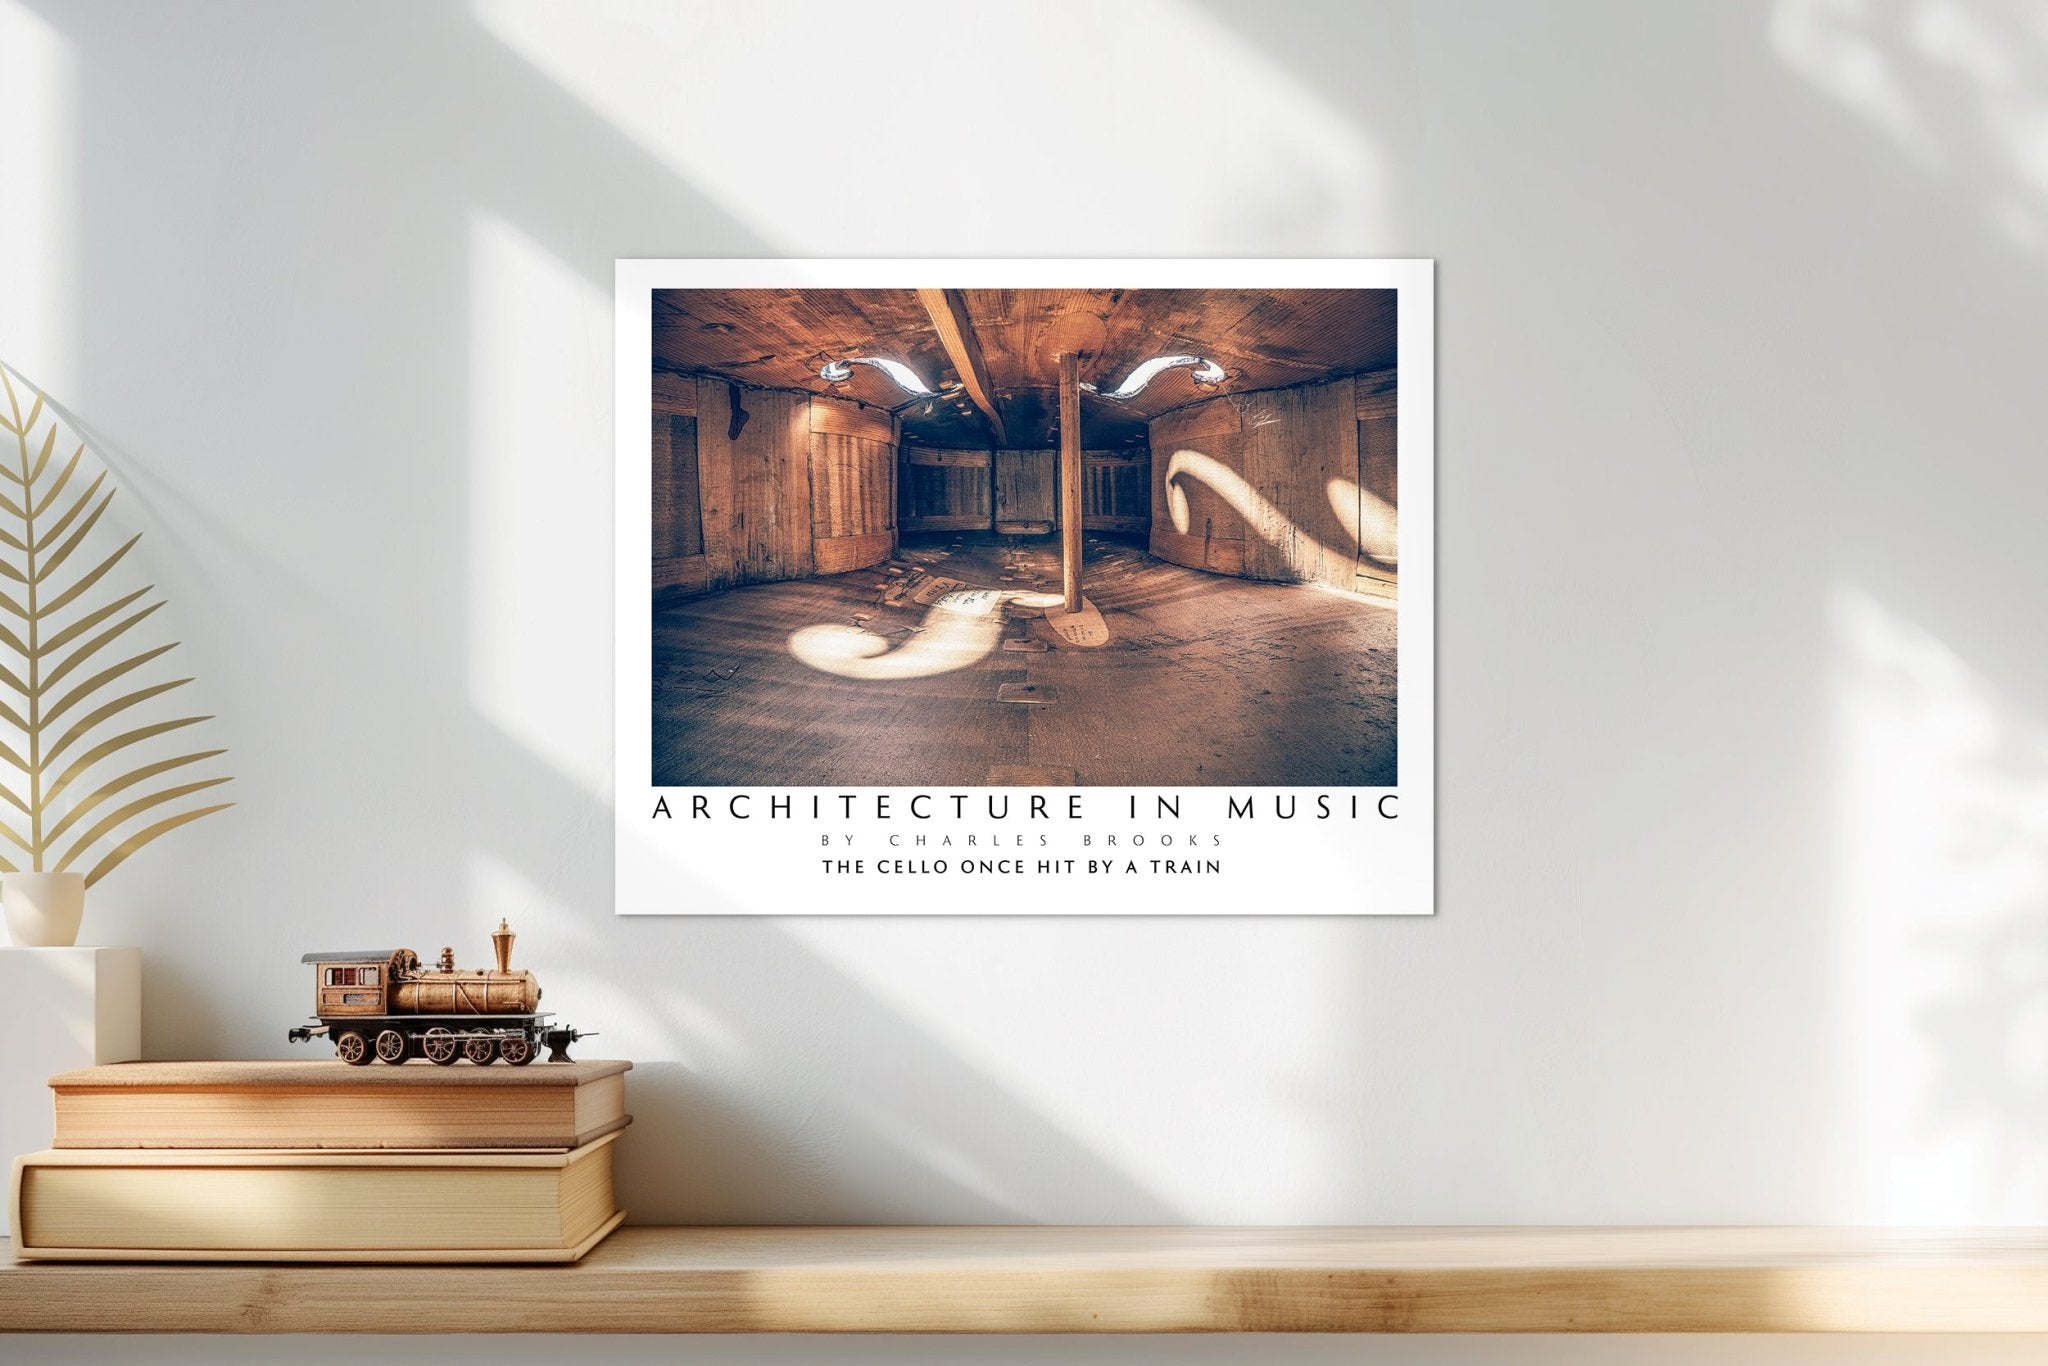 Photo of The Cello Once Hit by a Train. High Quality Poster. - Giclée Poster Print - Architecture In Music